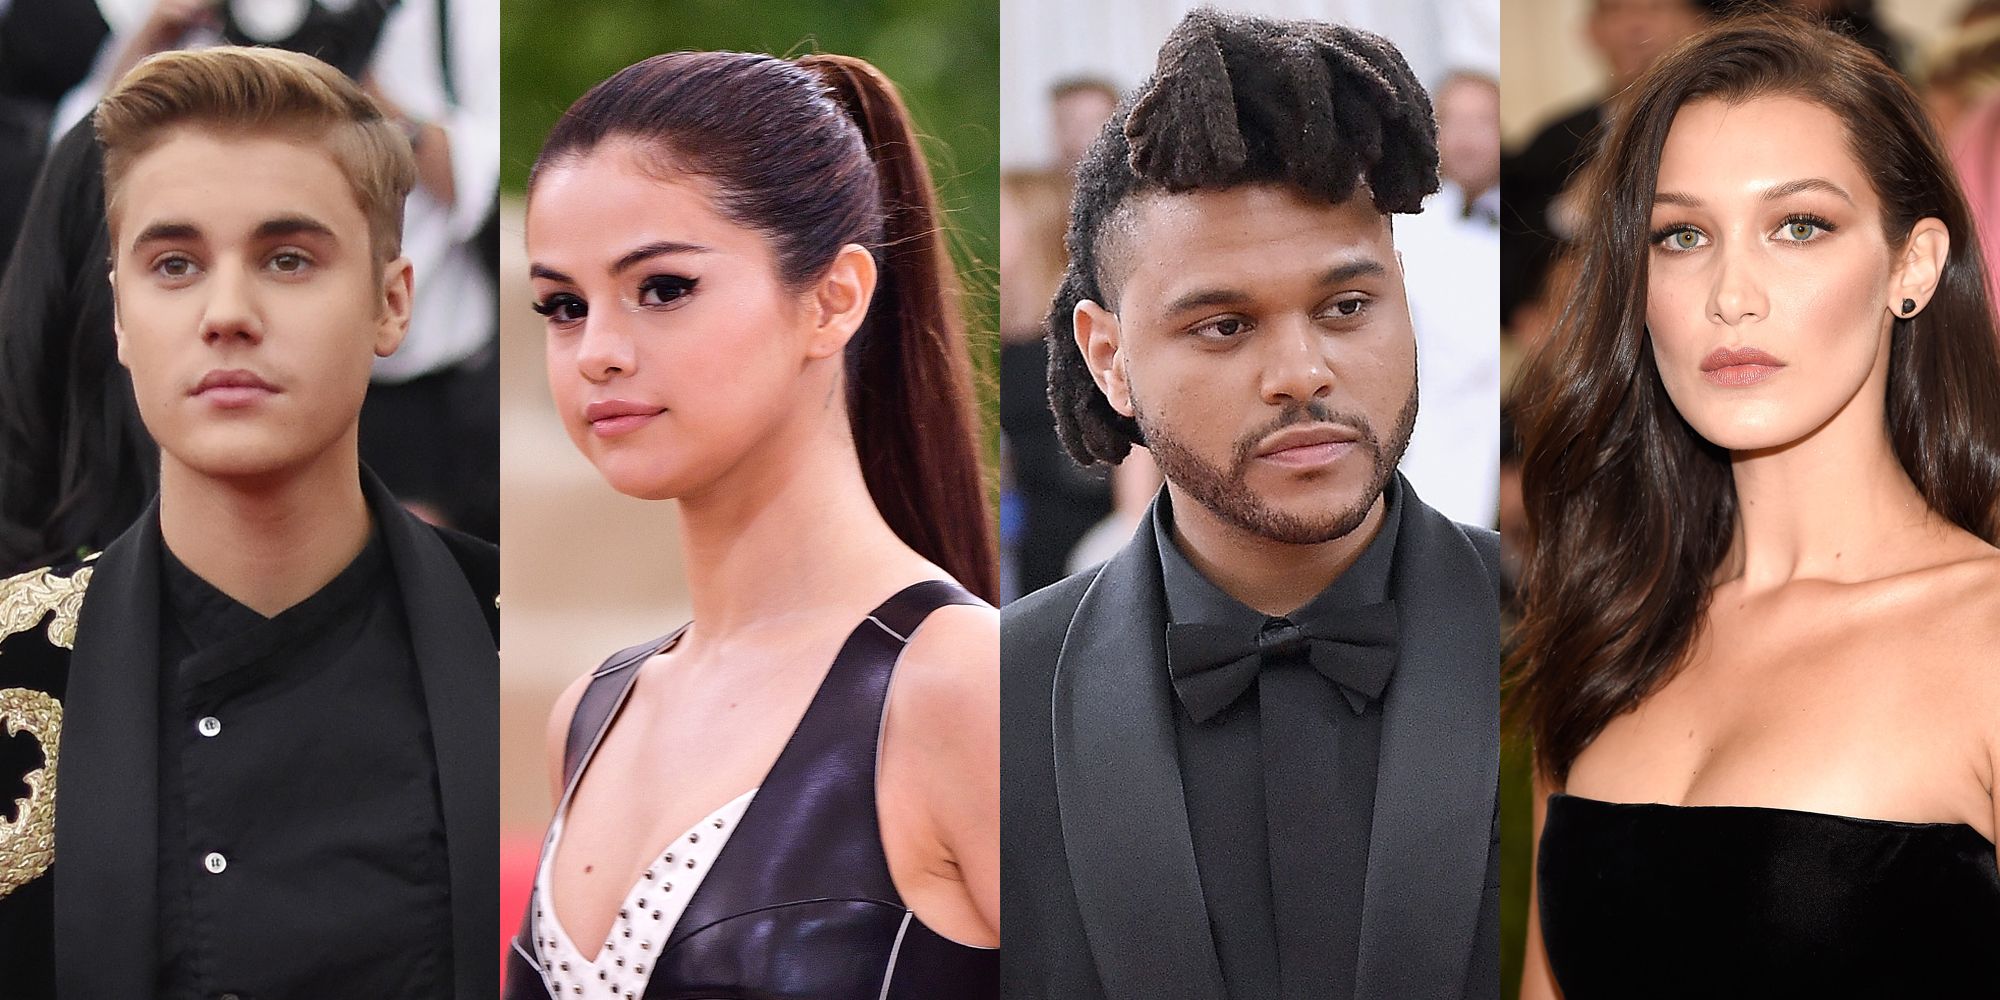 Selena Gomez and The Weeknd Go to Met Gala 2017 Together